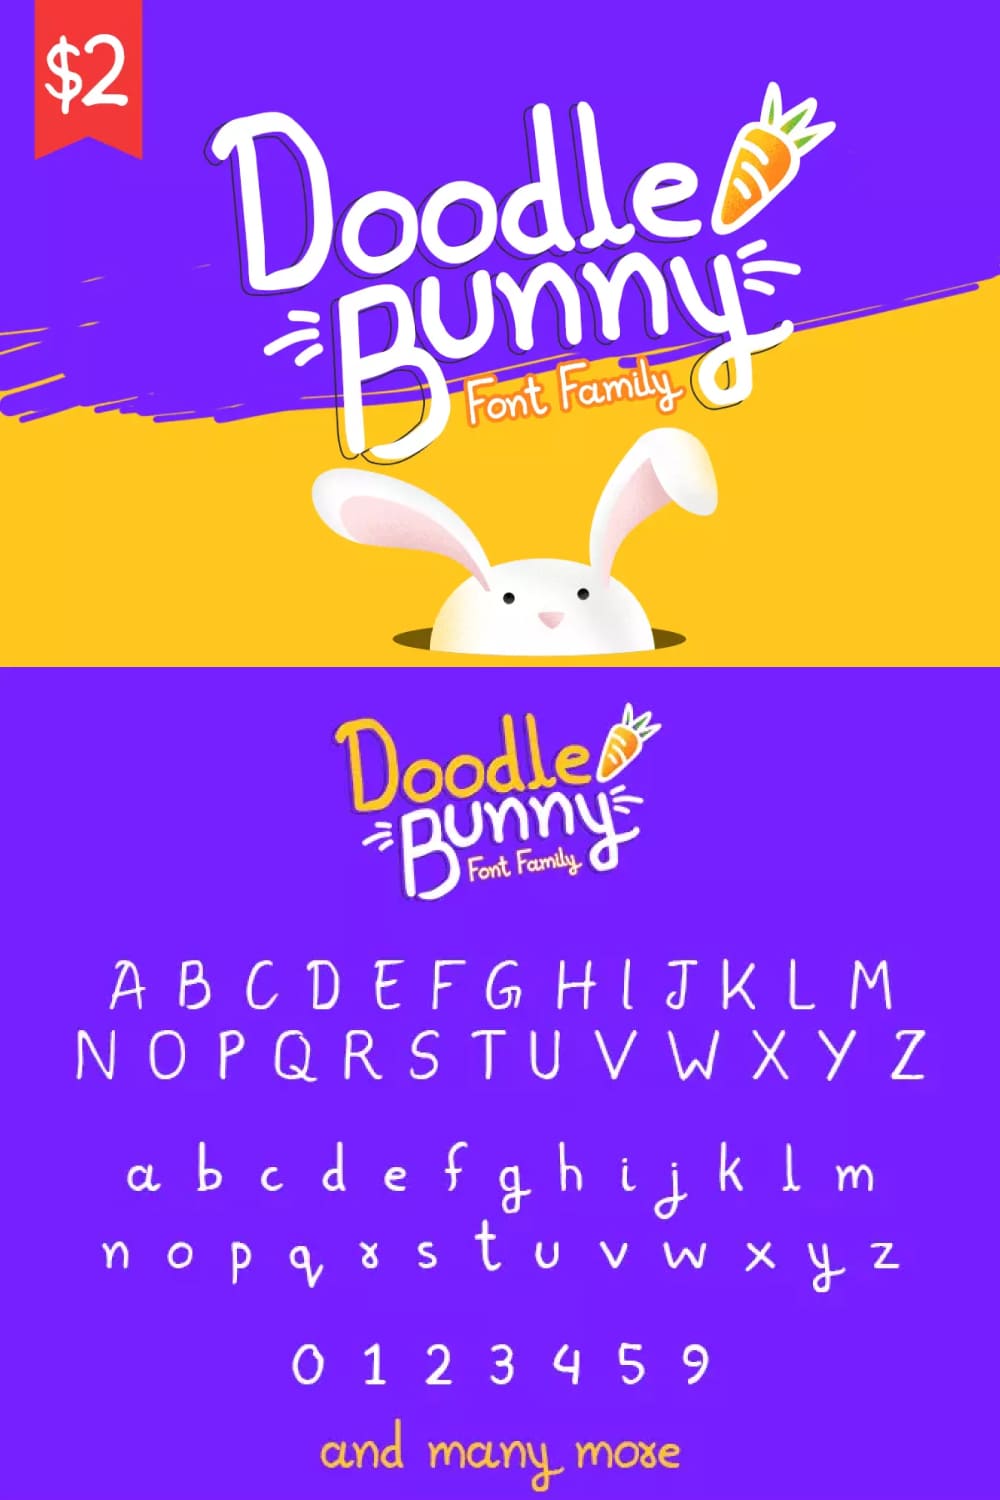 The name of the font and its alphabet on a bright yellow and purple background.